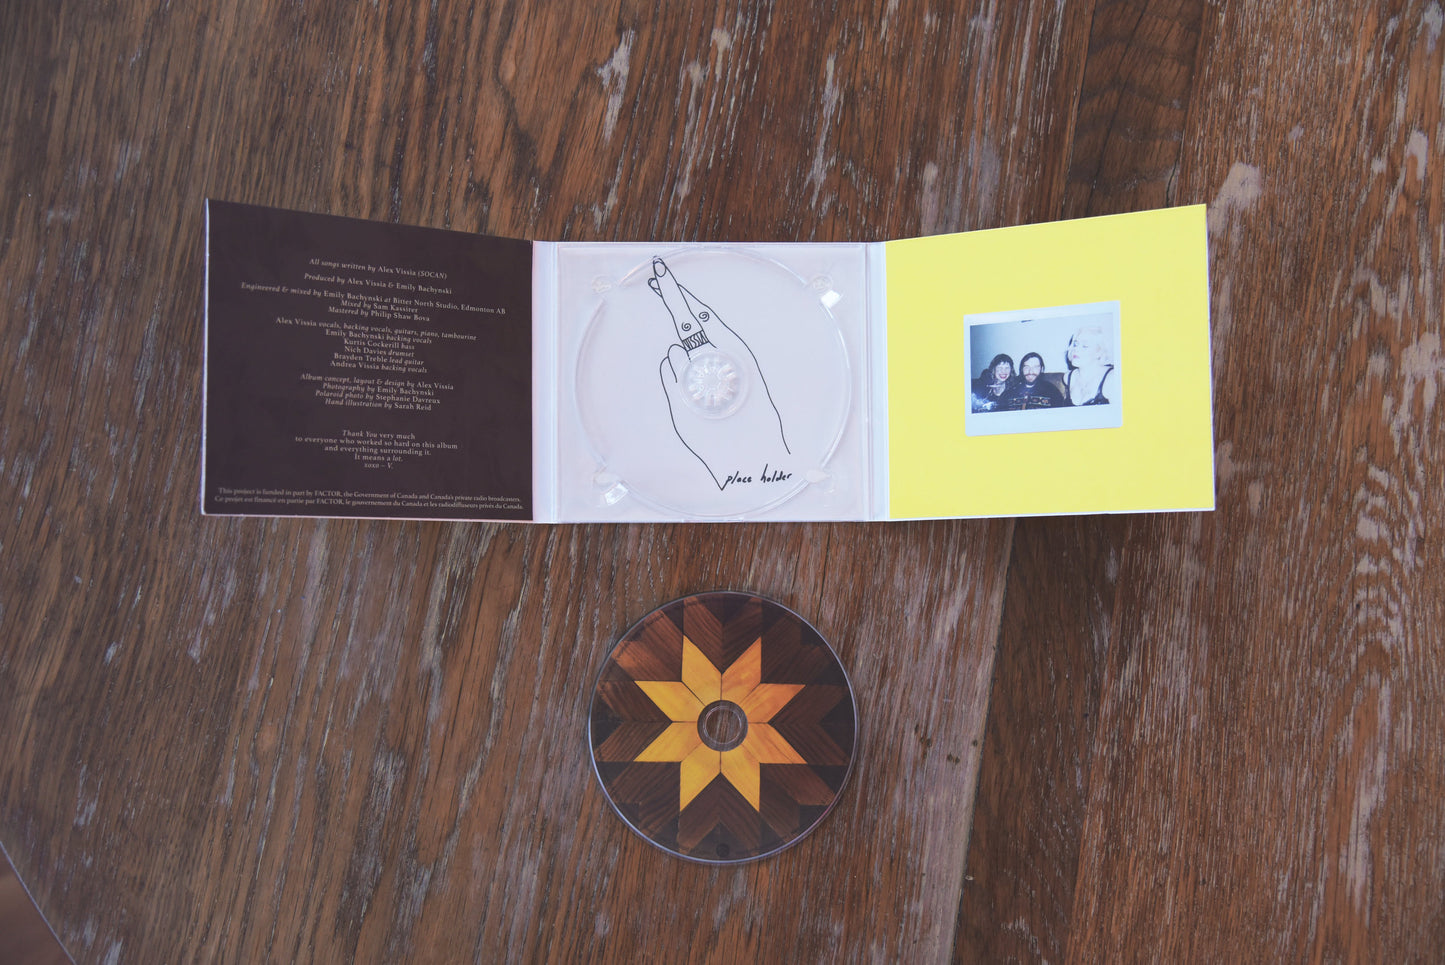 Inside look at VISSIA Place Holder CD artwork; illustration of fingers crossed; polaroid photo of three friends sitting on a couch with glitter on their cheeks - the photo is against a bright yellow background